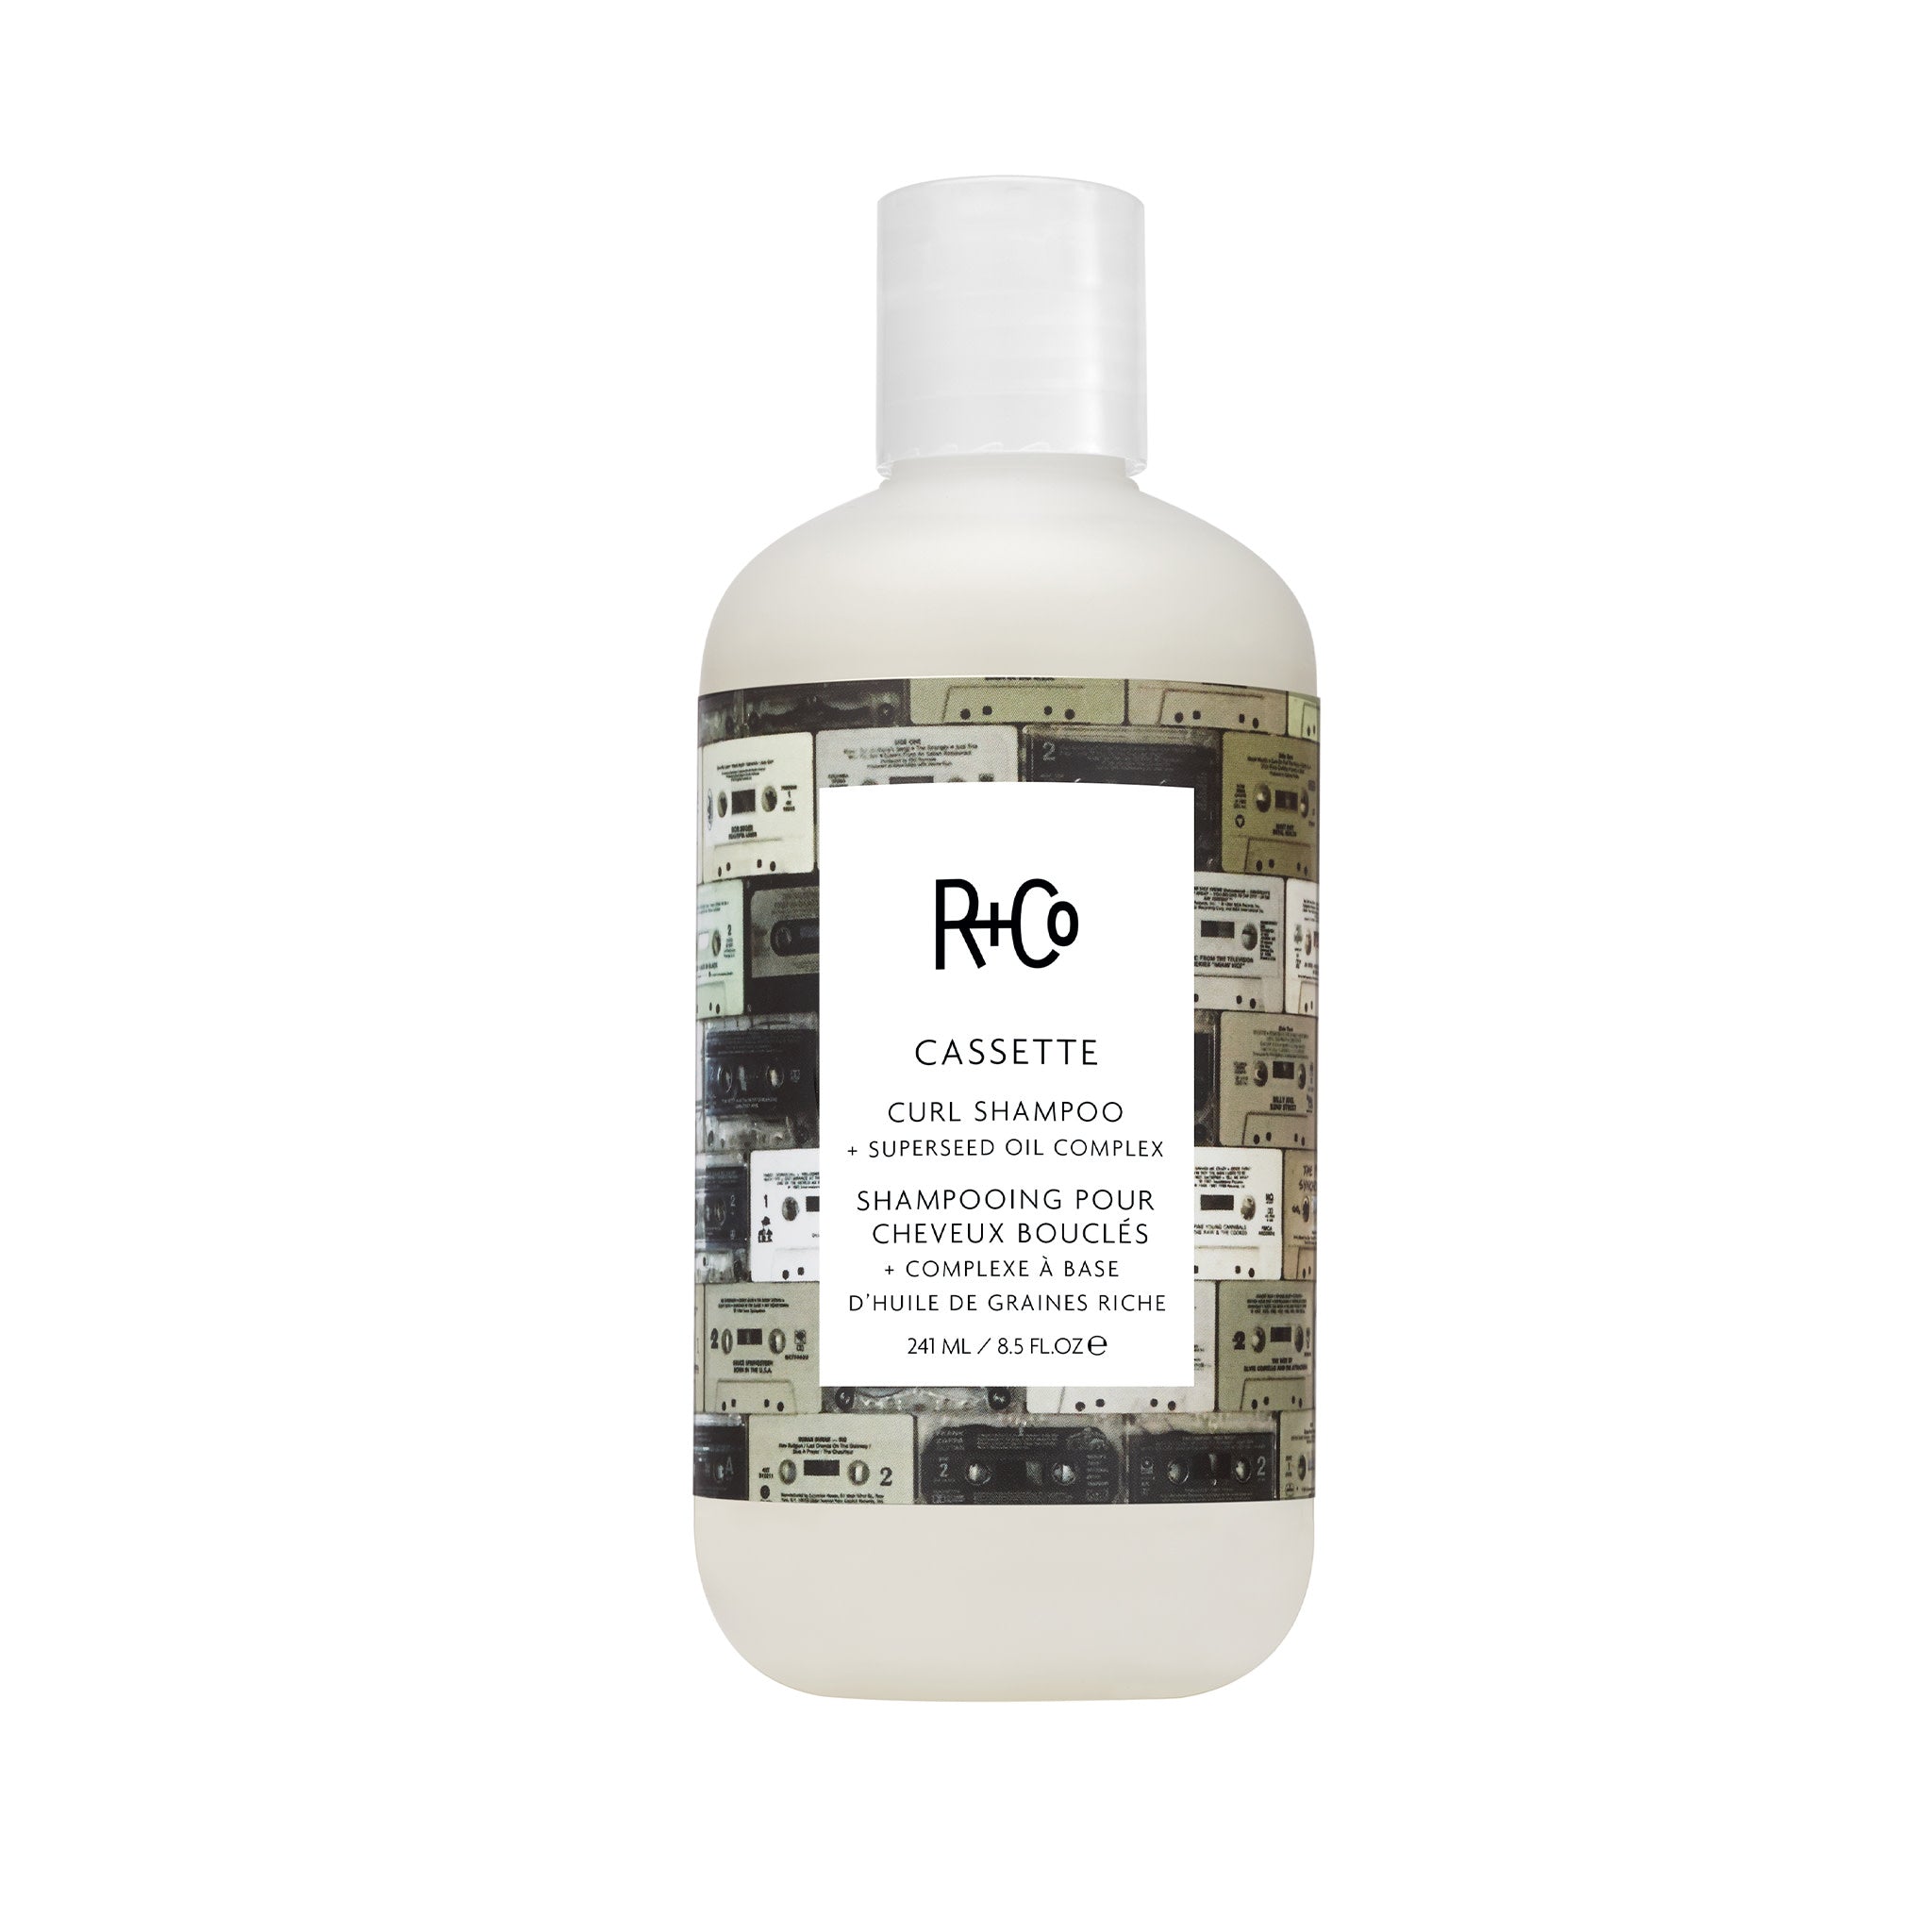 R+Co Cassette Curl Shampoo and Superseed Oil Complex main image.